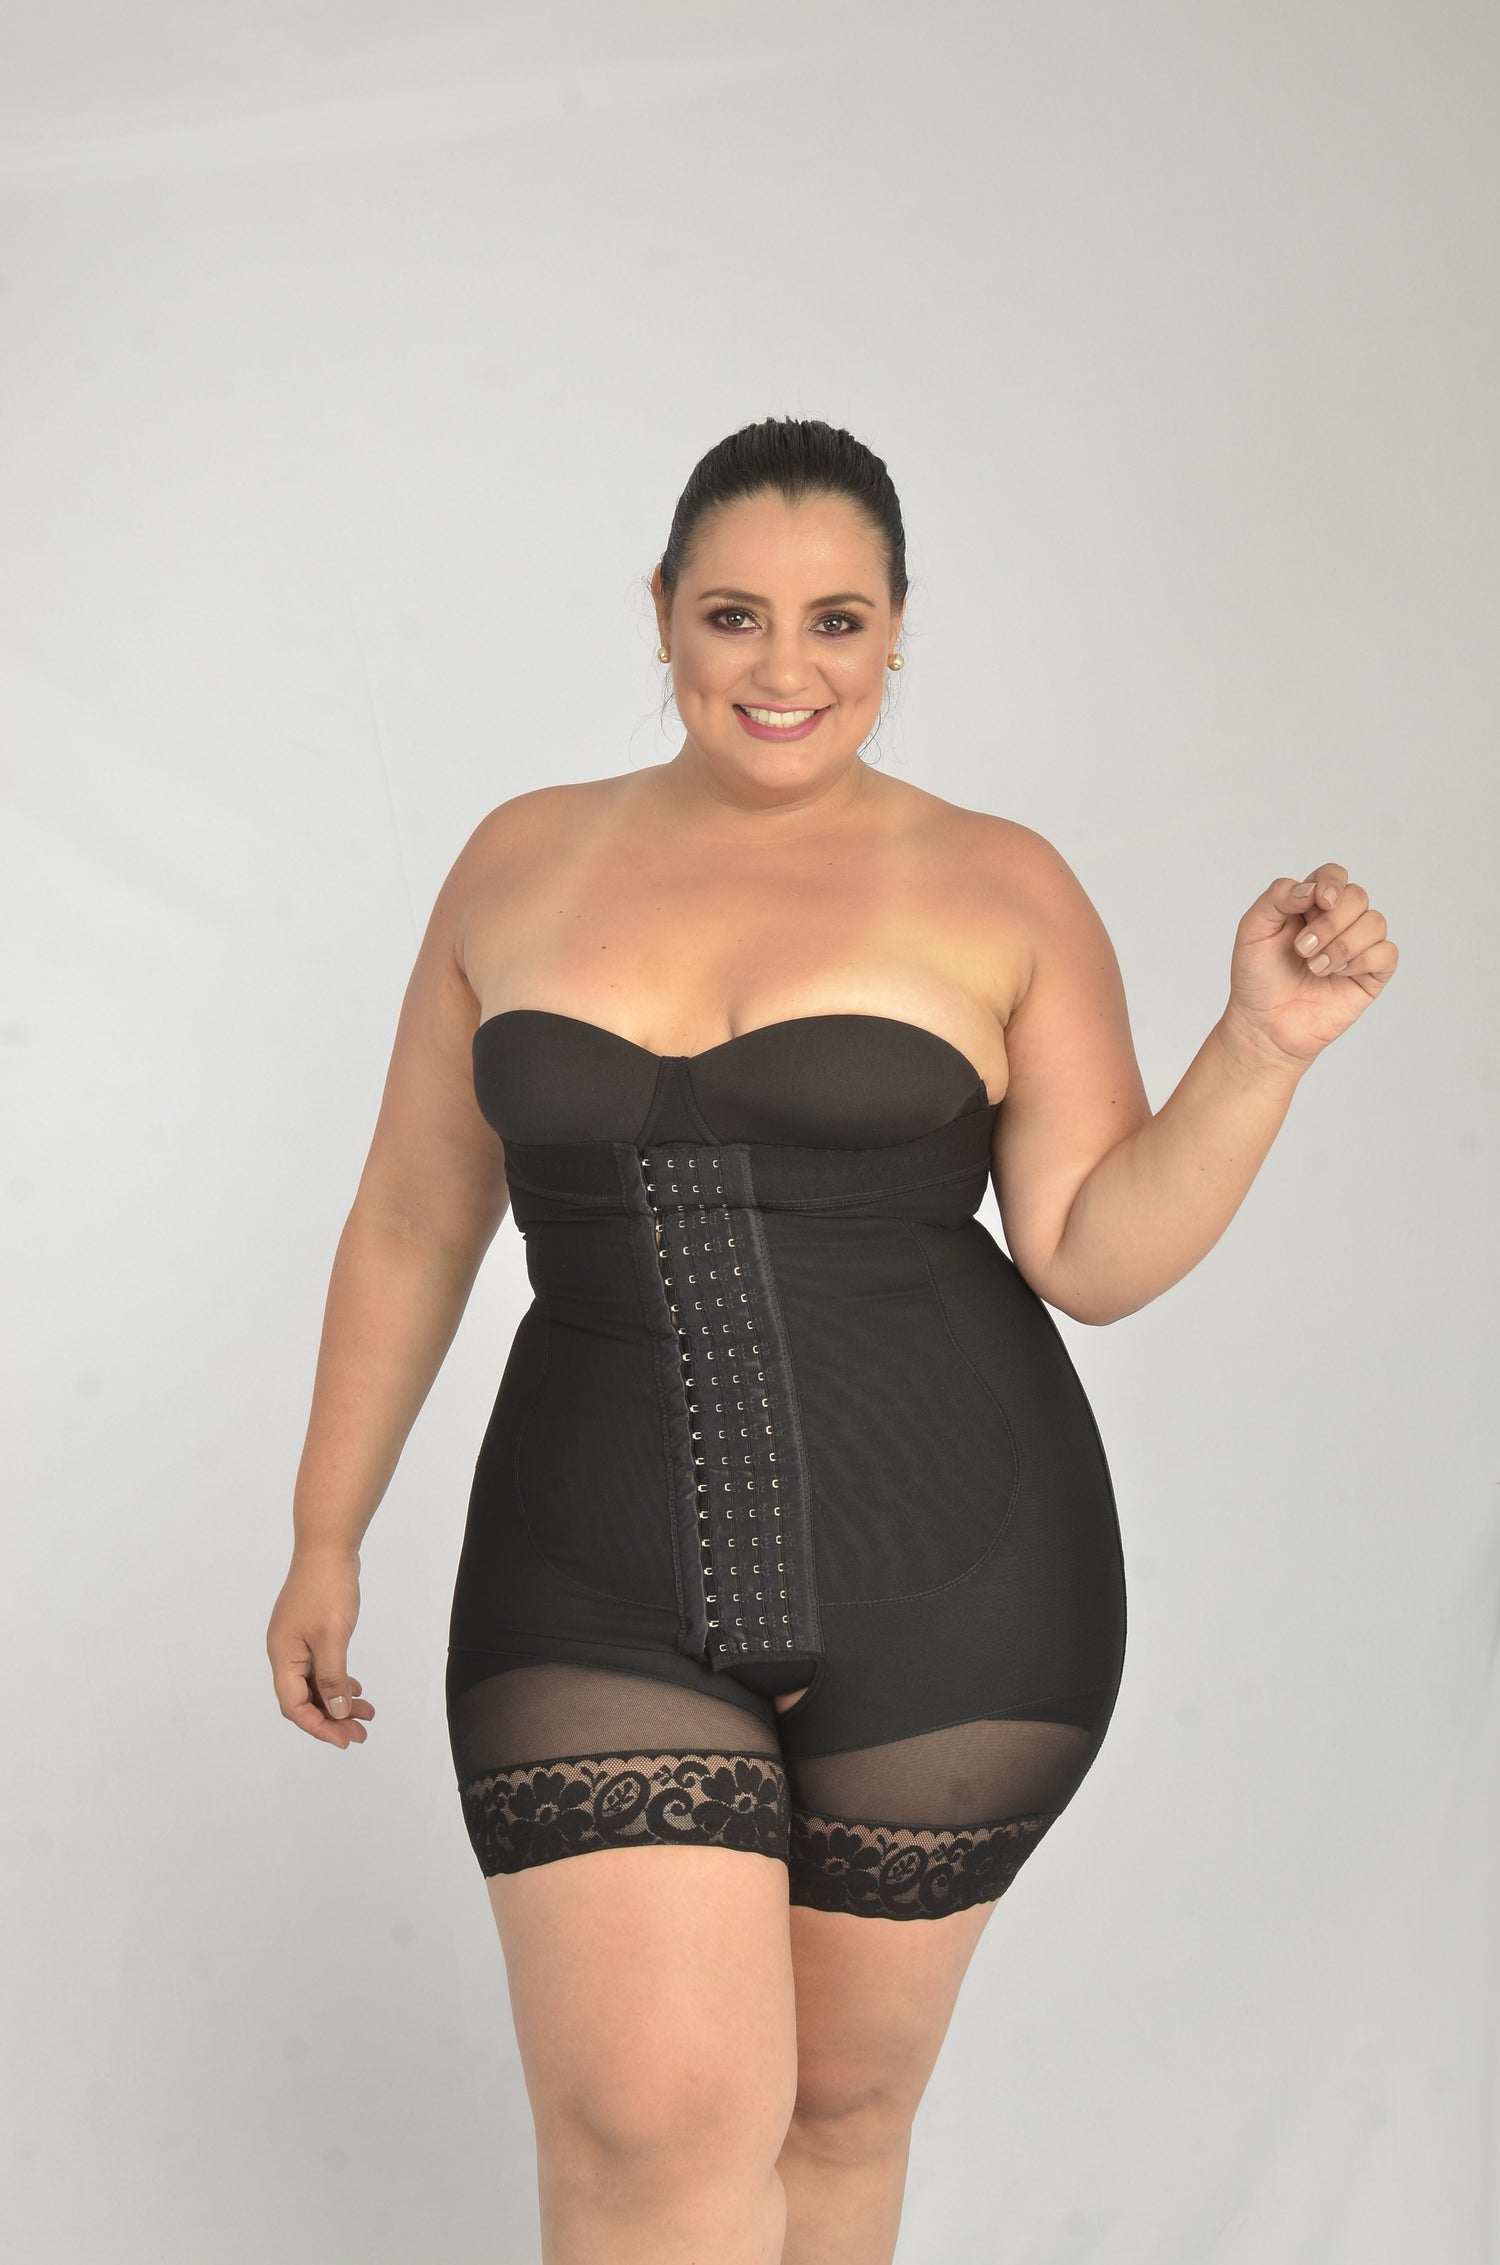 Buy the best shapewear and girdles for Lipoesculture Recovery.